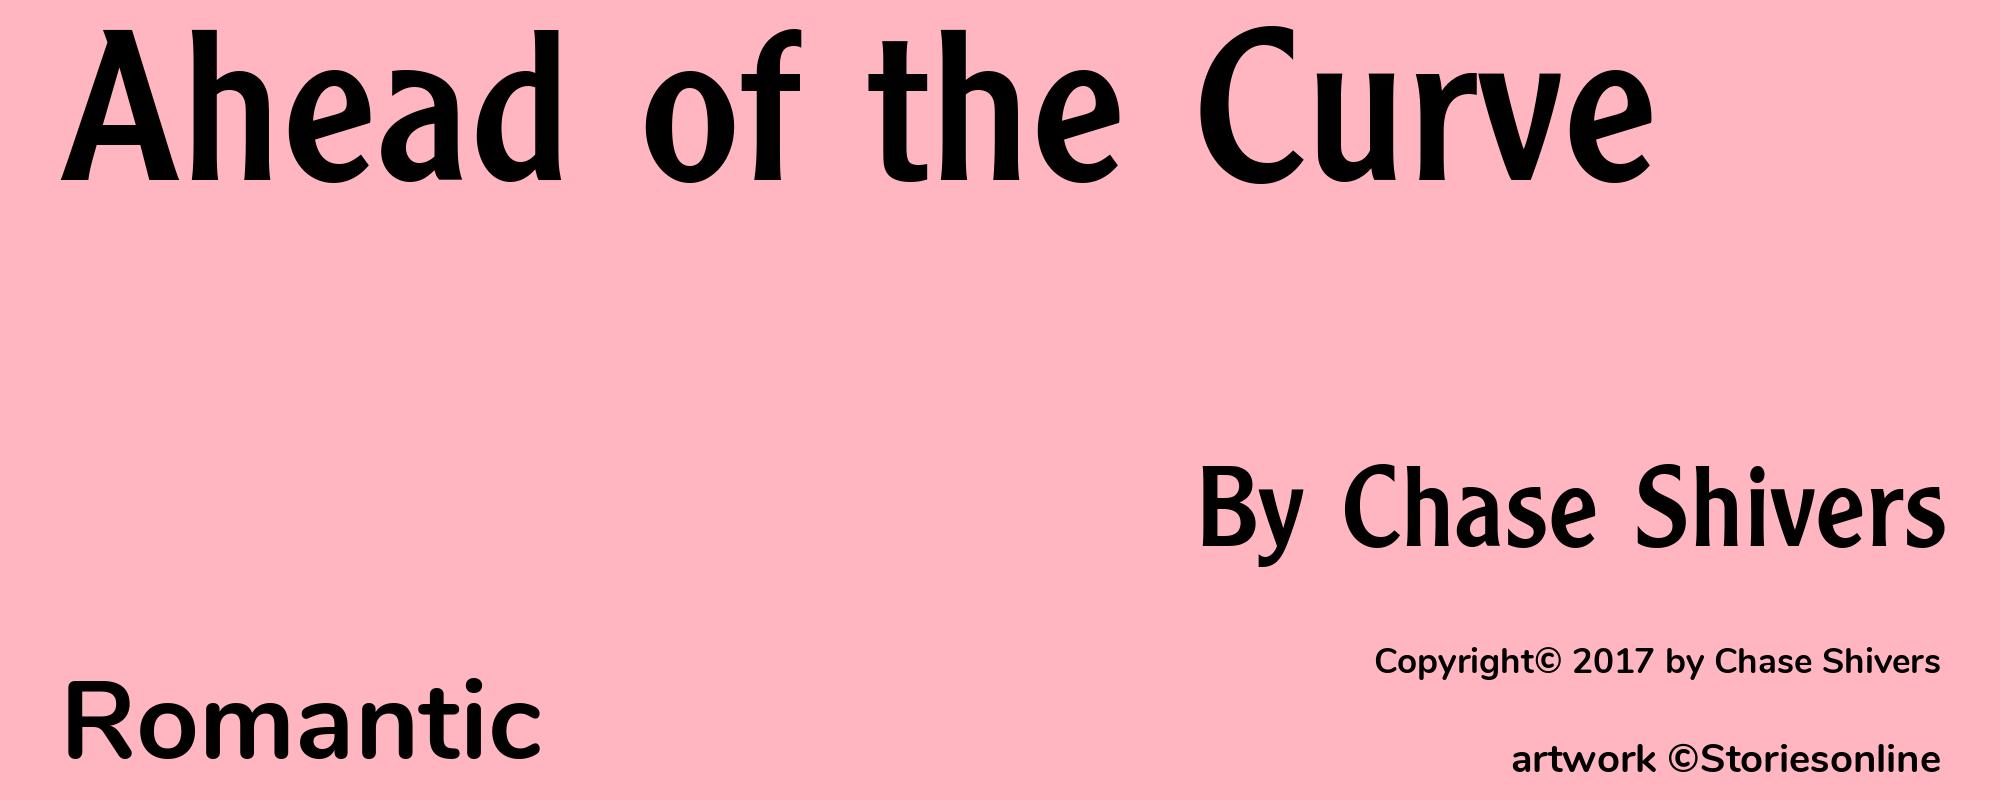 Ahead of the Curve - Cover